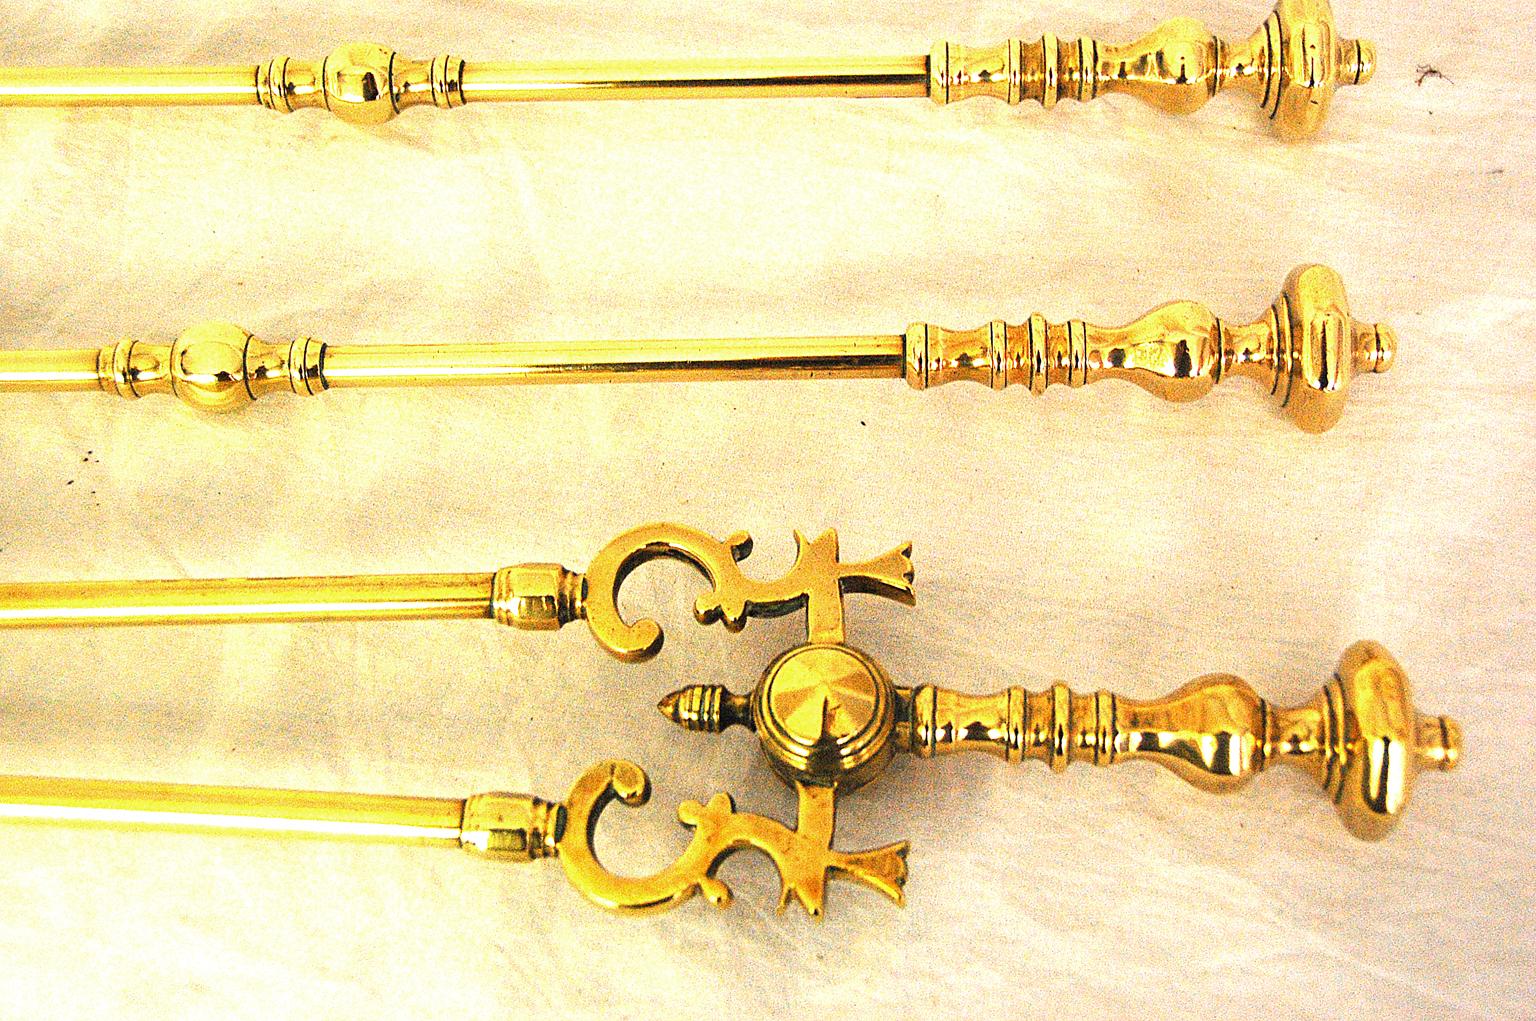 English set of three cast brass firetools of the mid-19th century period, very heavy quality, in good working order, including a pierced shovel, fire tongs, and poker. The octagonal knopped handles are an unusual design, circa 1850.